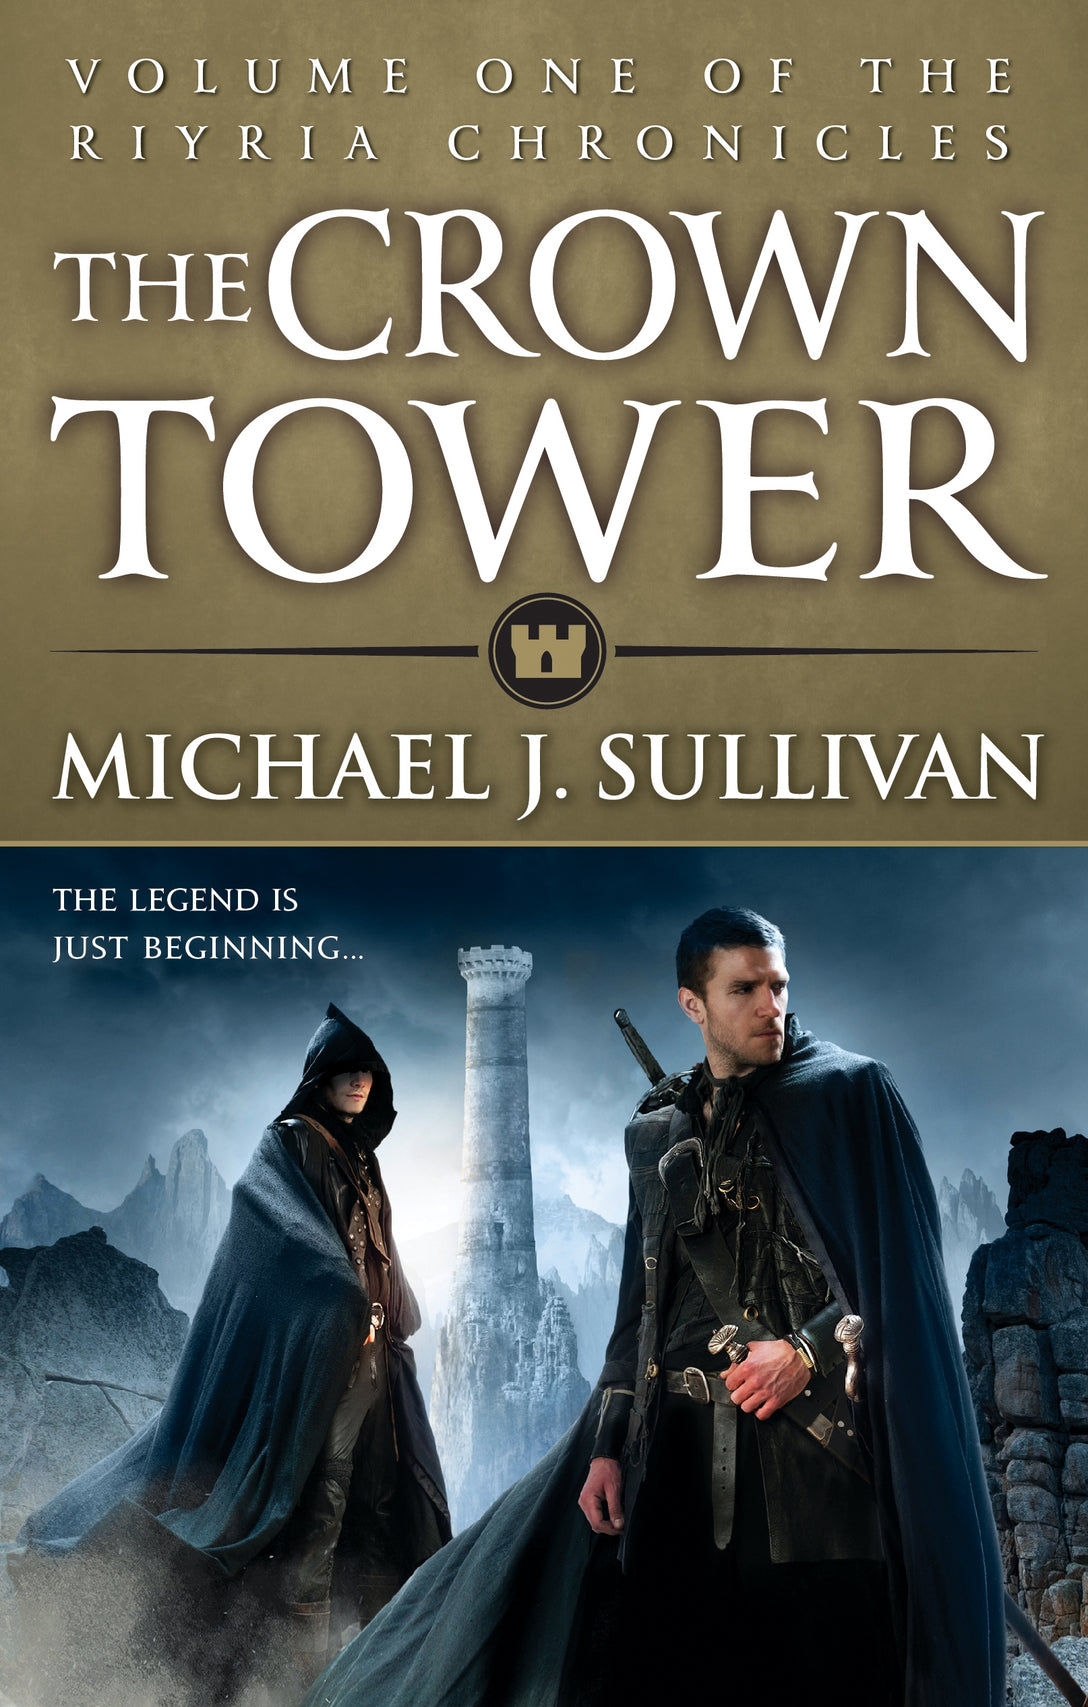 The Crown Tower by Michael J Sullivan